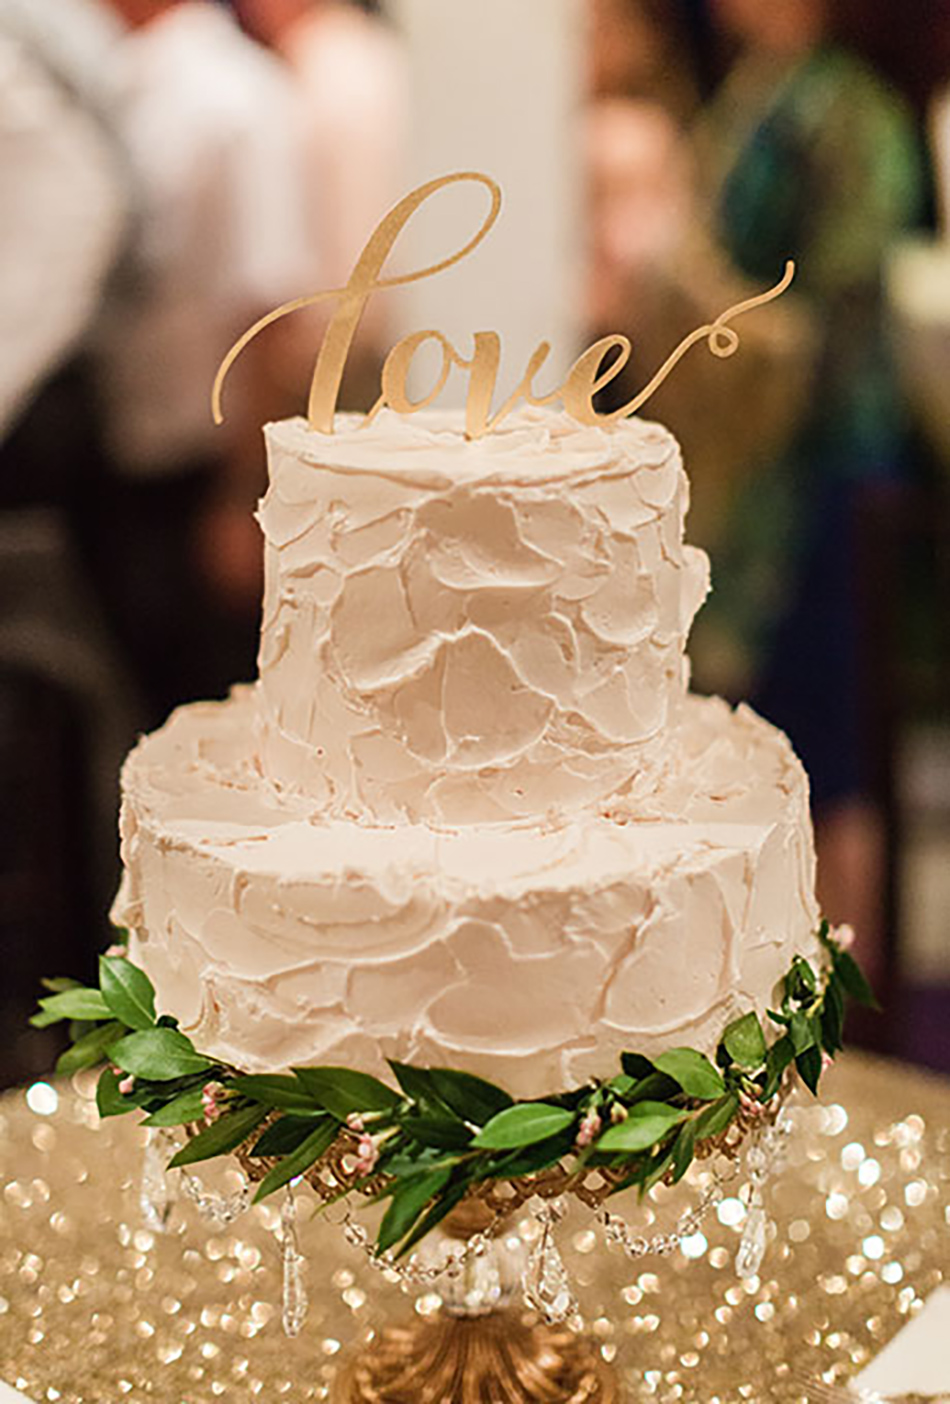 Bling up your barn wedding venue with sparkling metallic wedding cake accessories